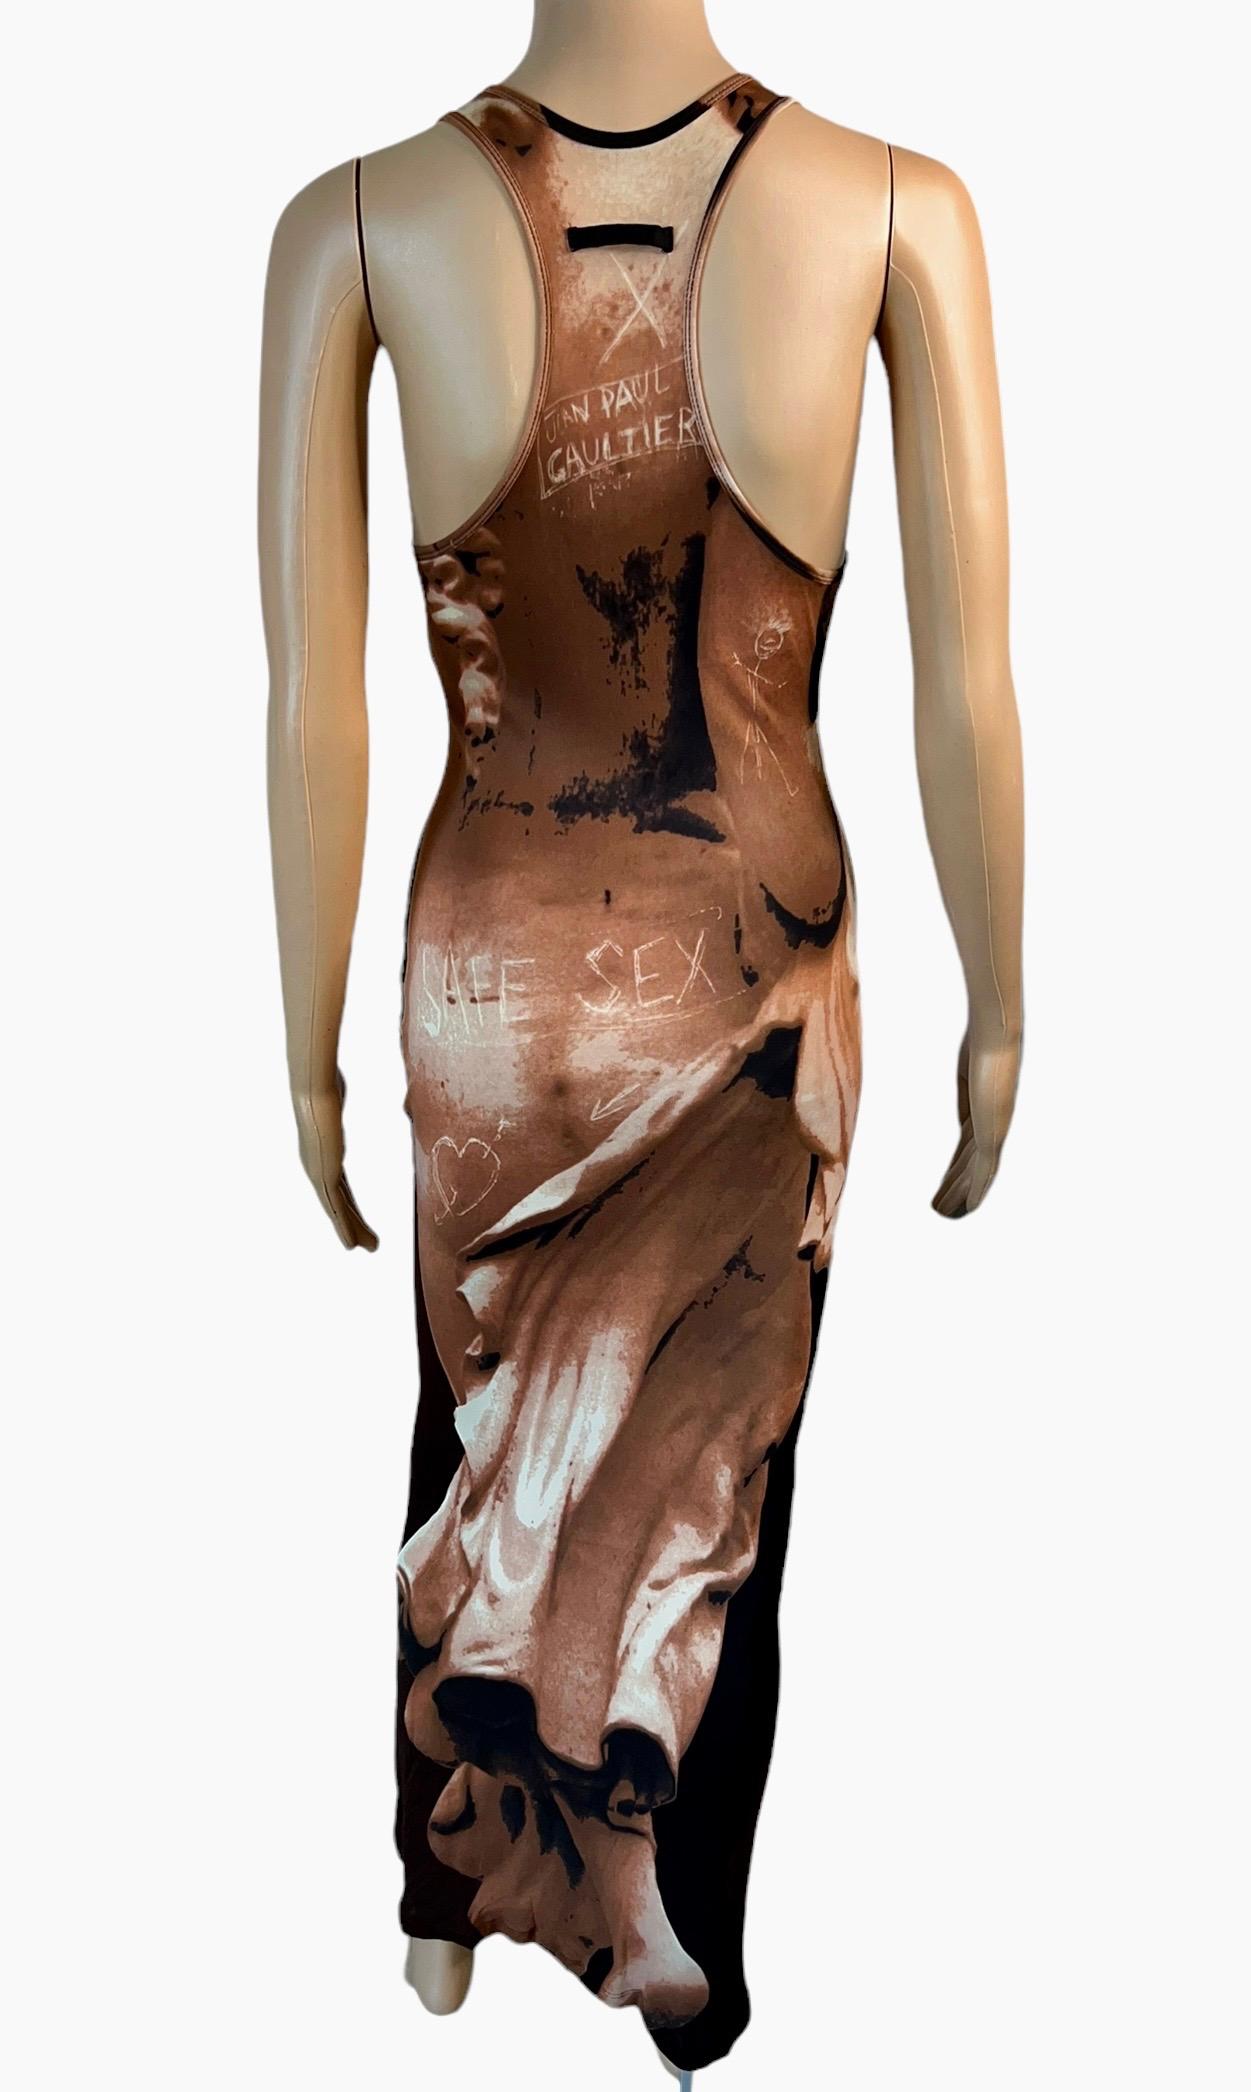 Jean Paul Gaultier S/S 1999 Runway Goddess Trompe L'oeil Graffiti Maxi Dress

Please note size tag is missing. Due to stretch this dress will fit sizes XS-M.